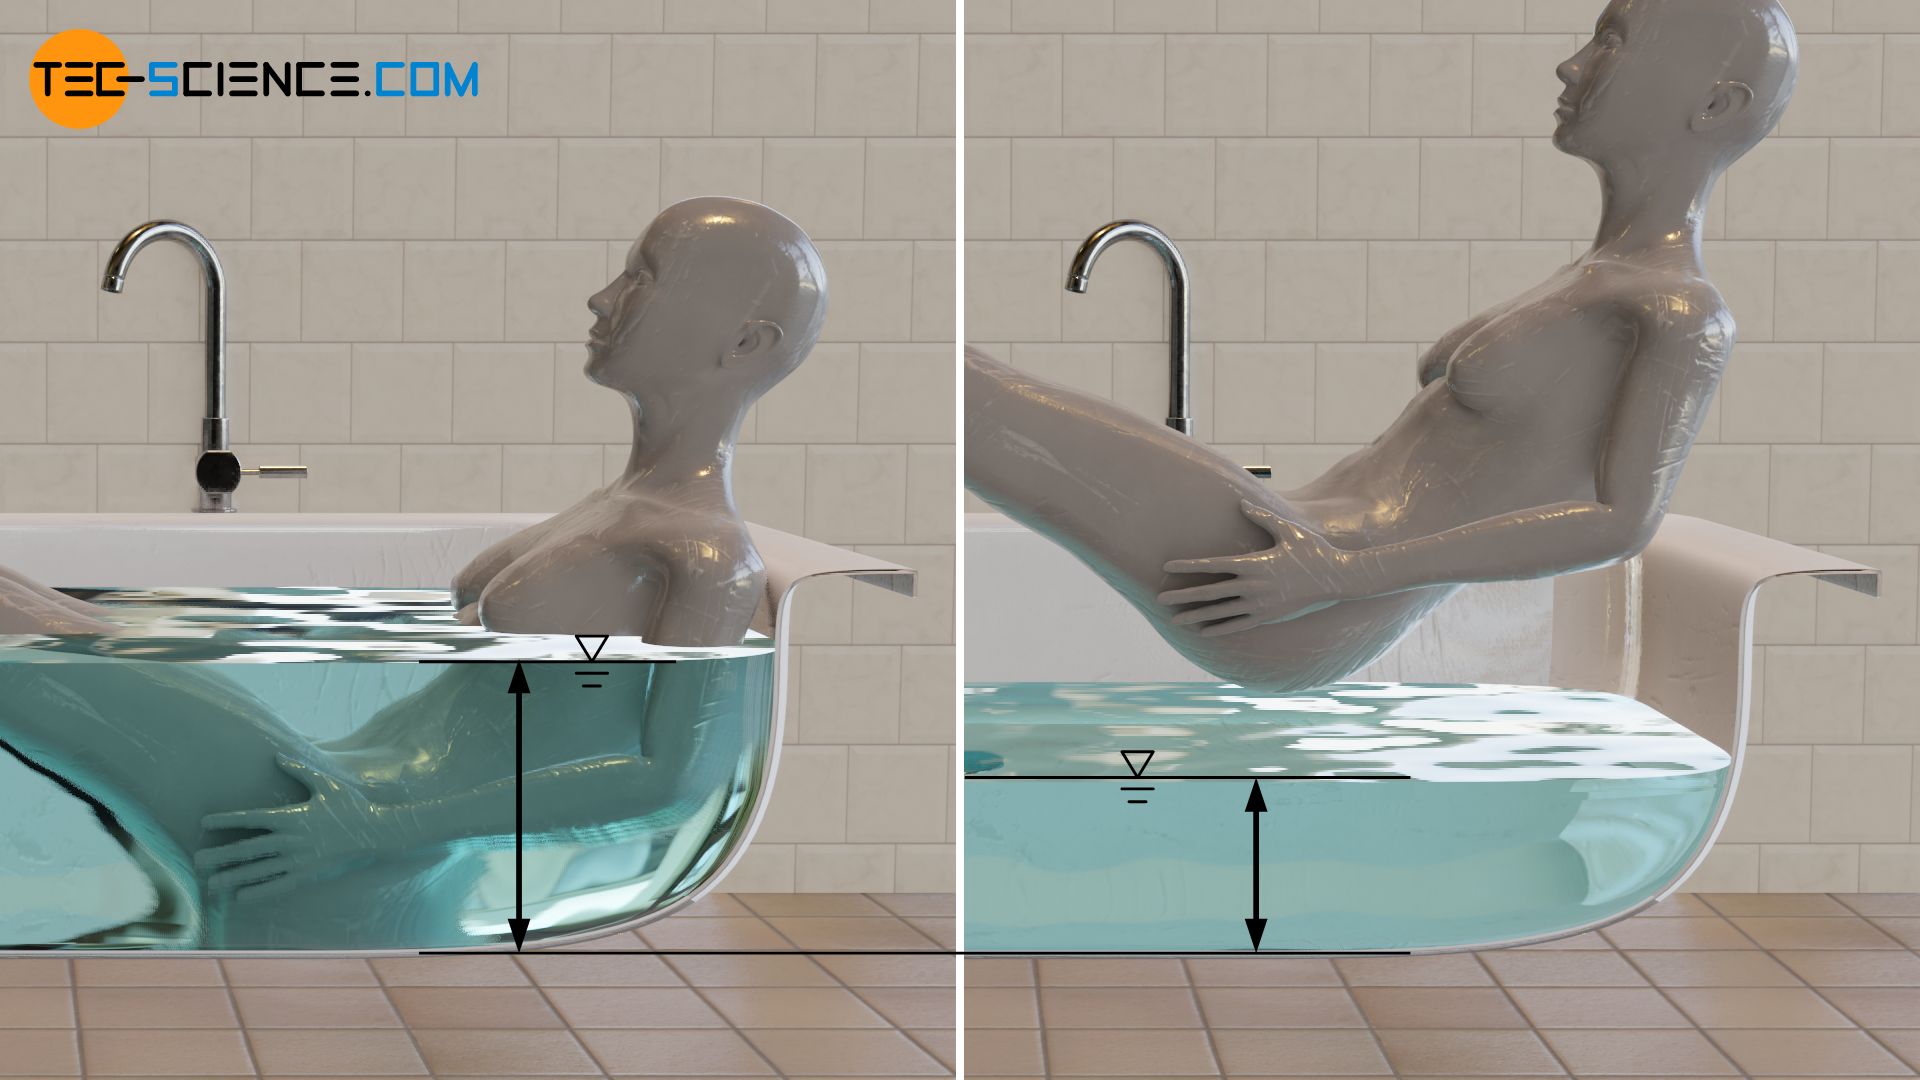 Water level in a bathtub with and without a person in it